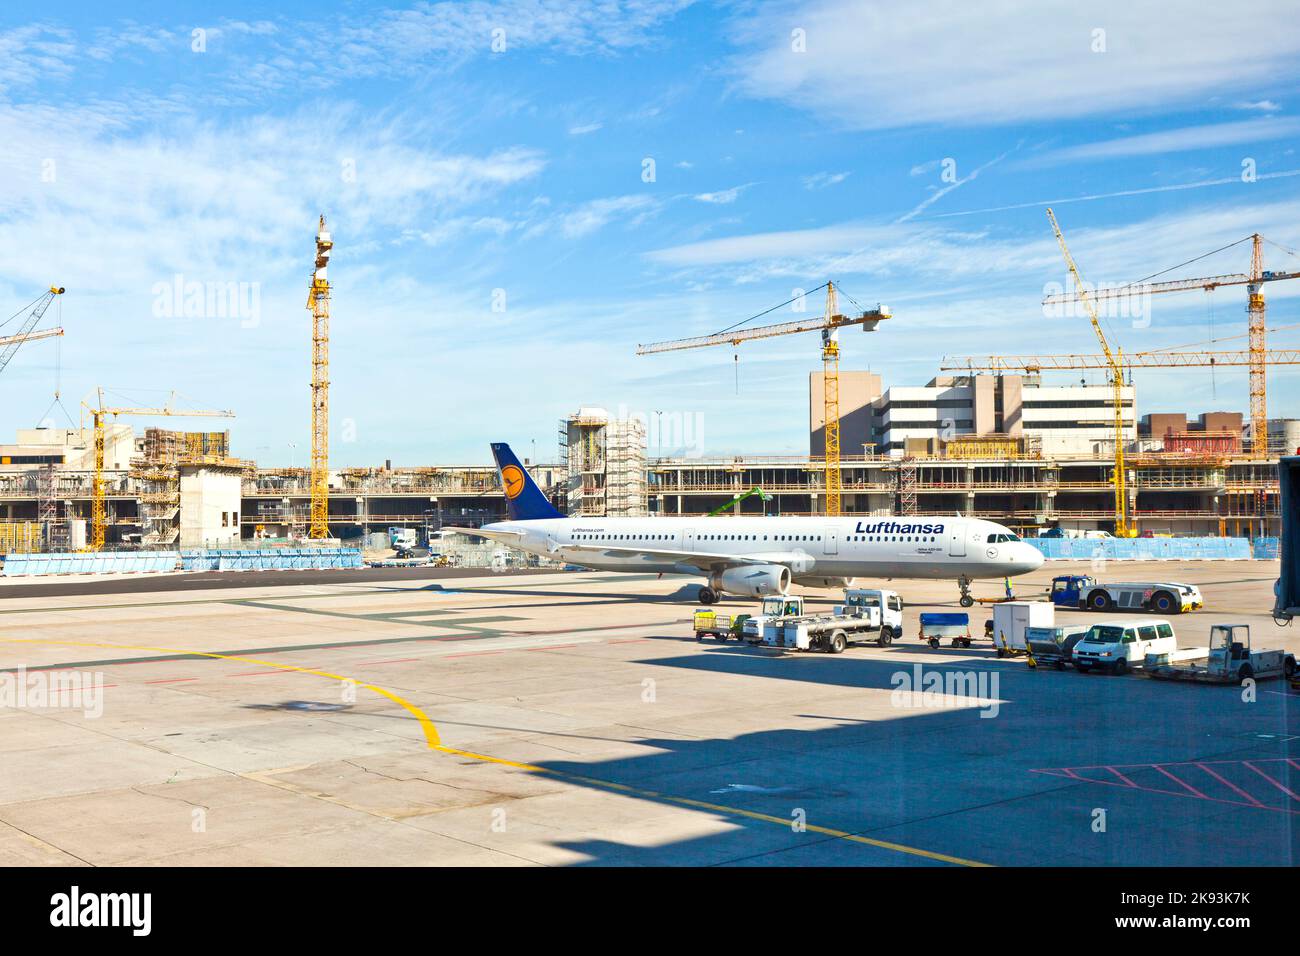 FRANKFURT, GERMANY - AUG 25: Lufthansa Flight ready to head to runway on August, 25, 2011 in Frankfurt, Germany. New Terminal A is under construction Stock Photo